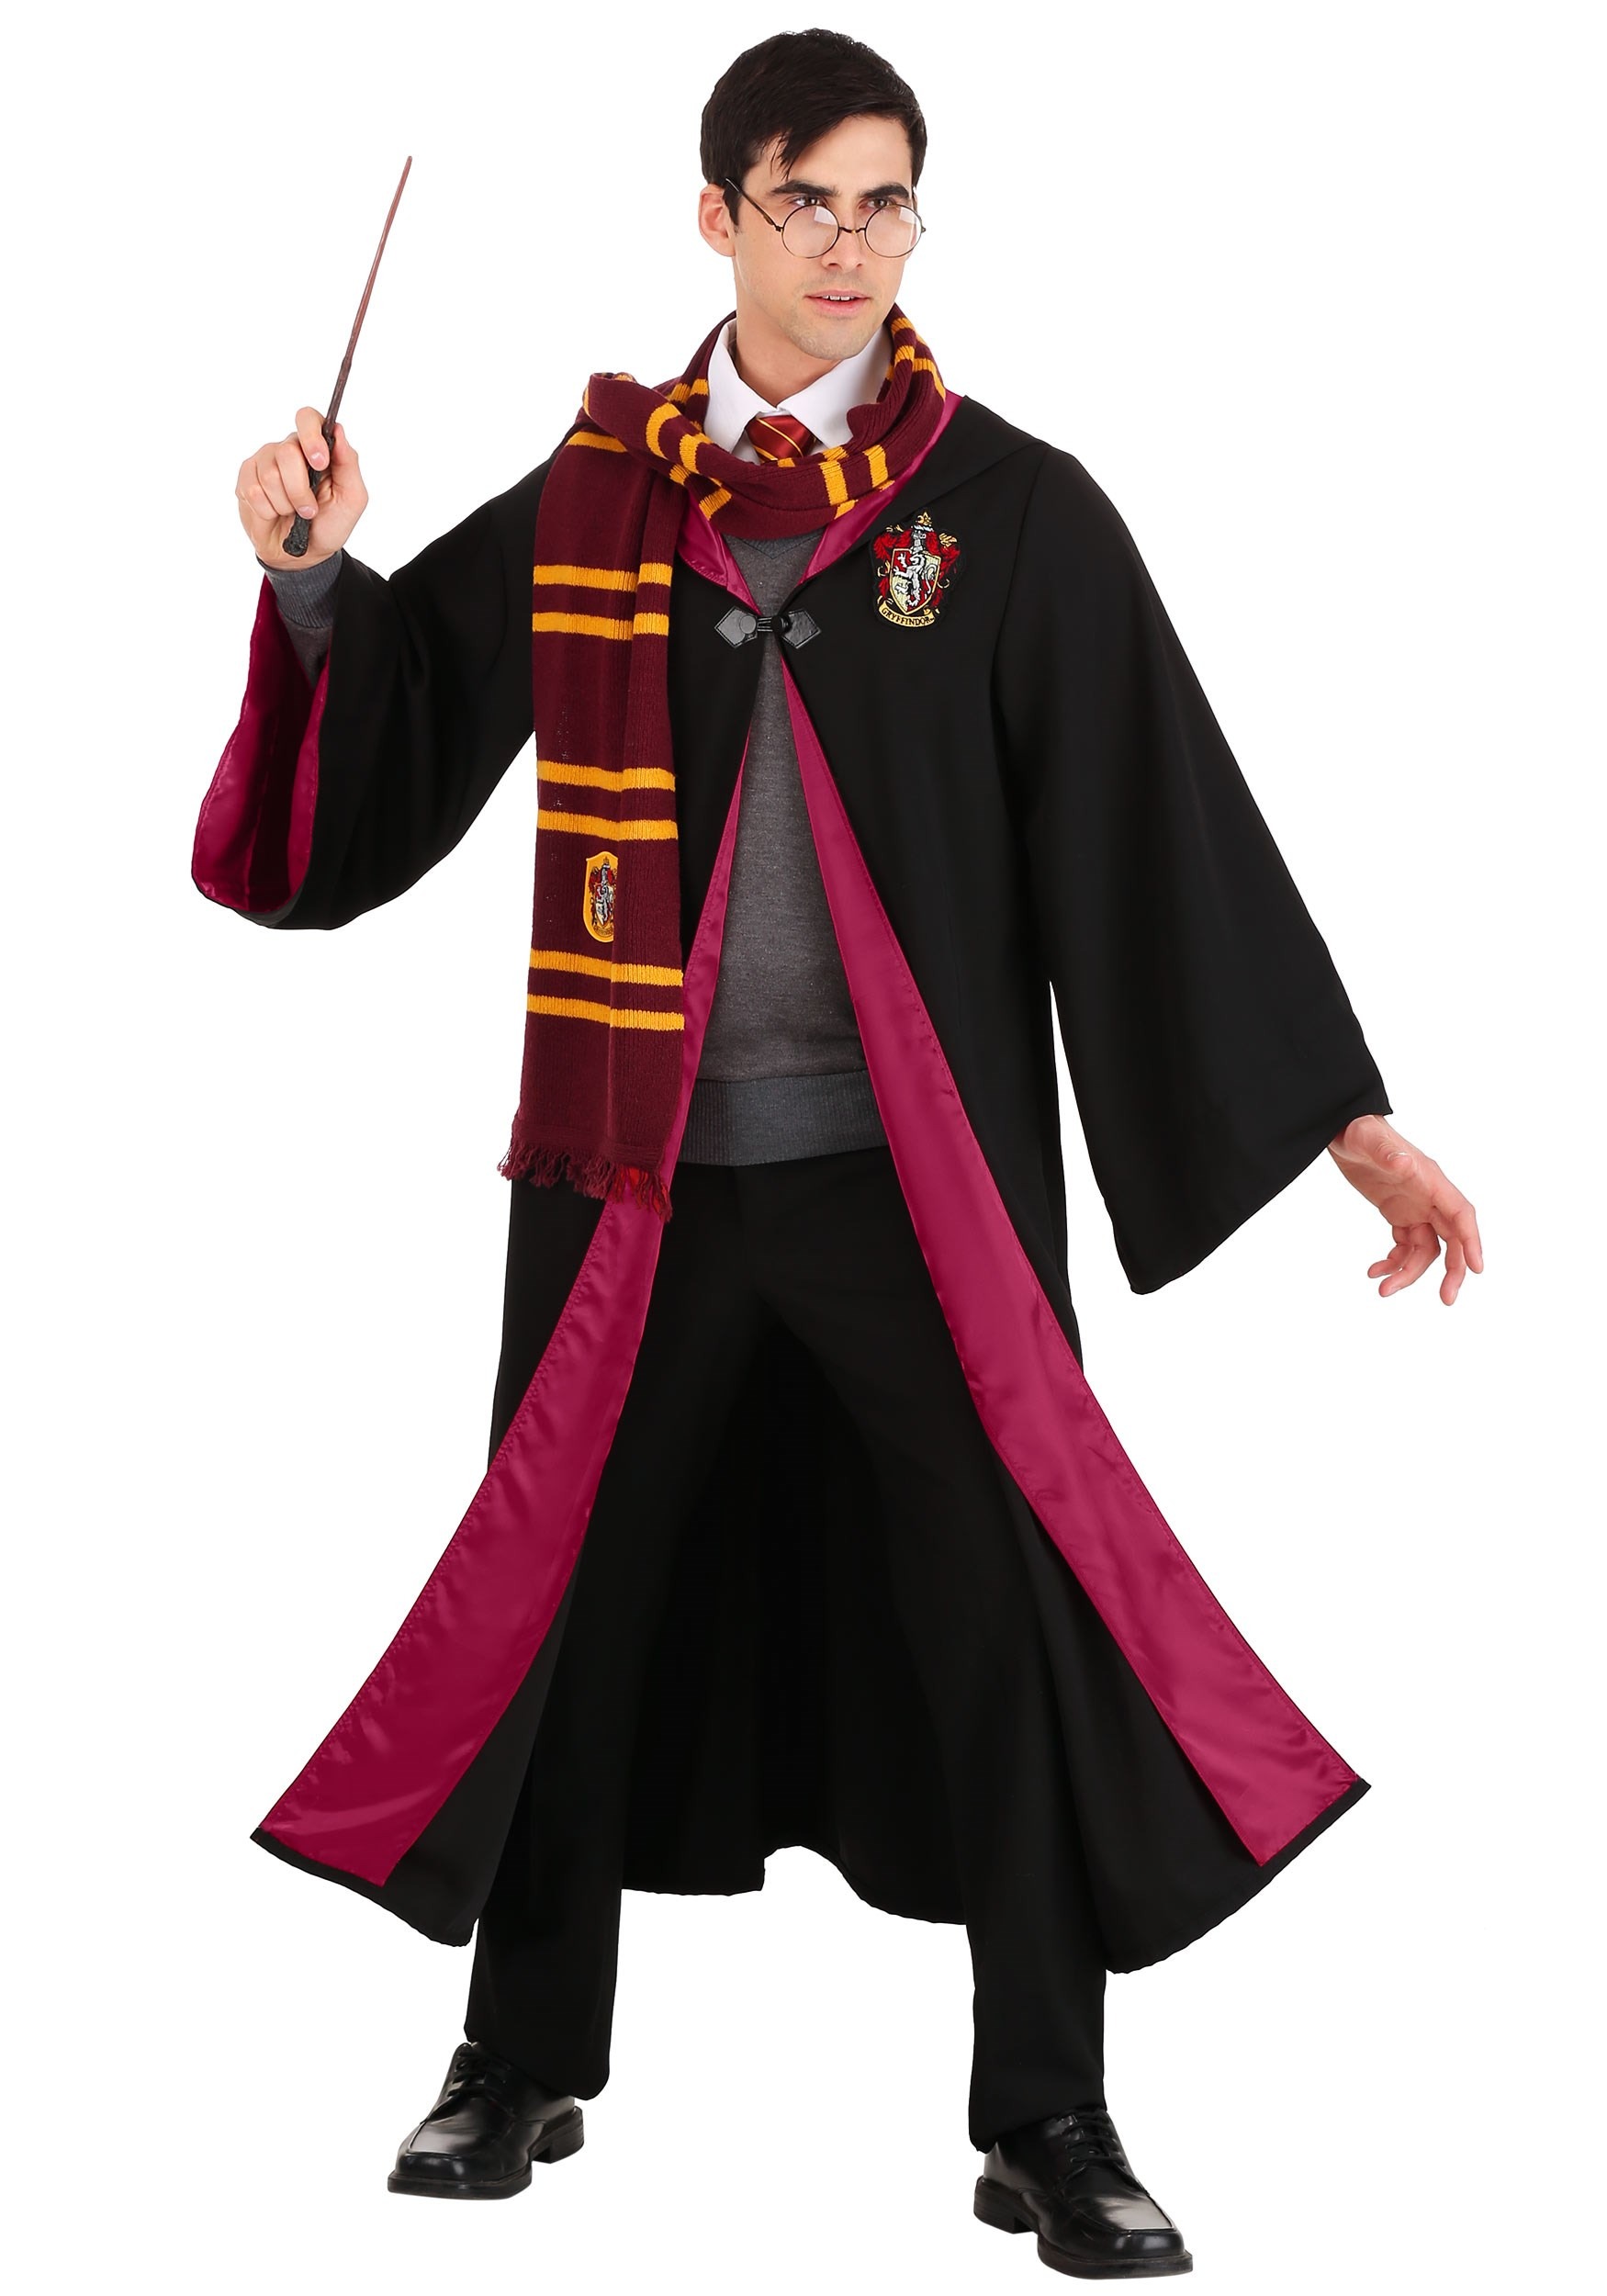 Harry potter  Harry potter robes, Harry potter costume, Harry potter  cosplay